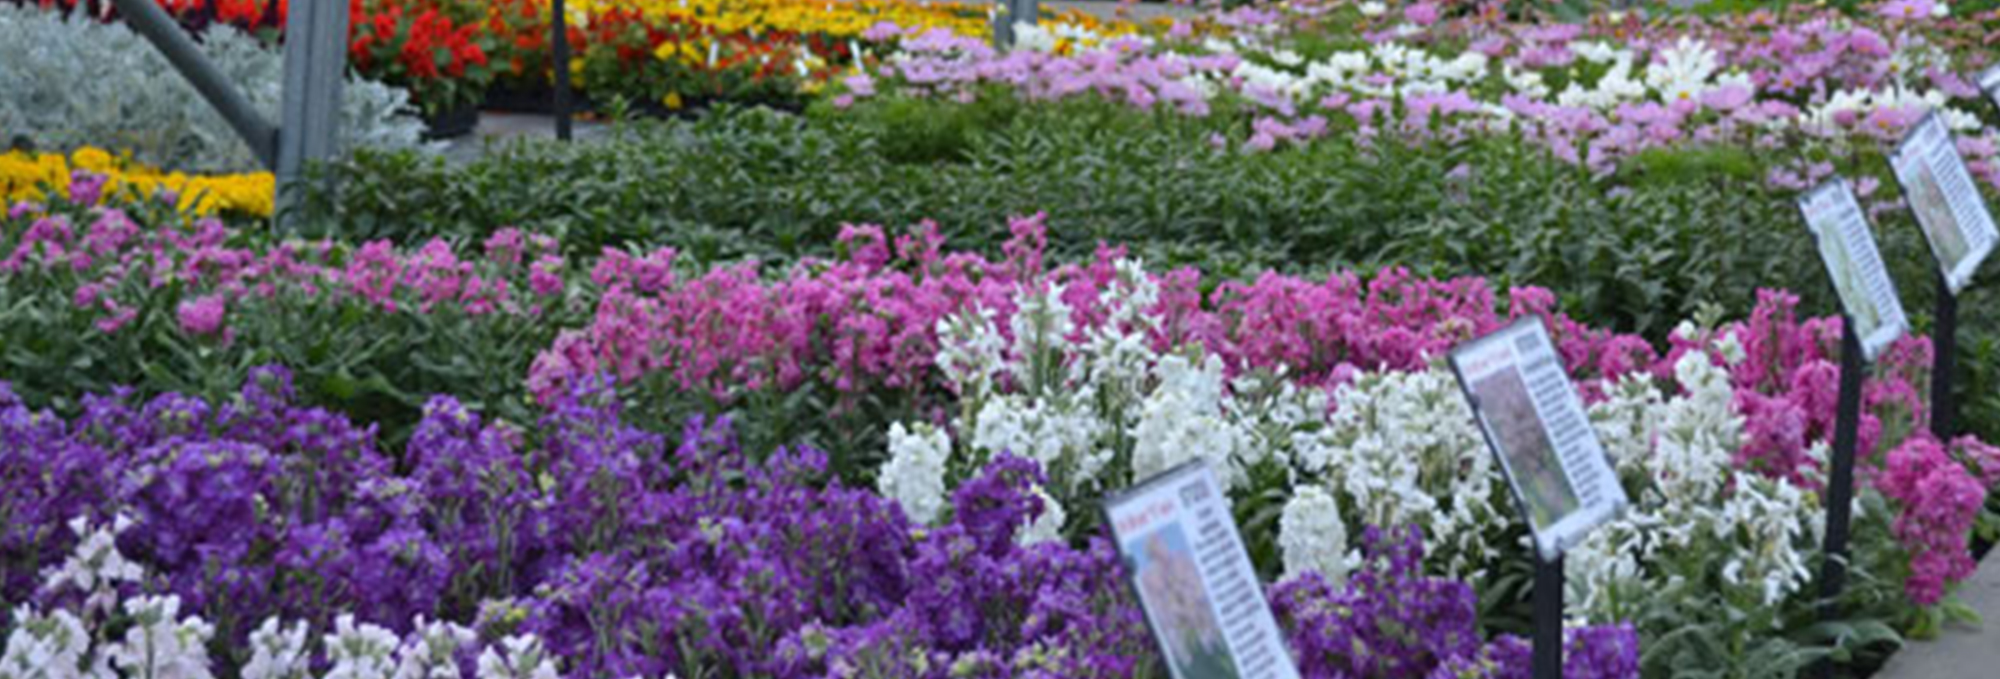 Bedding Plants and another title